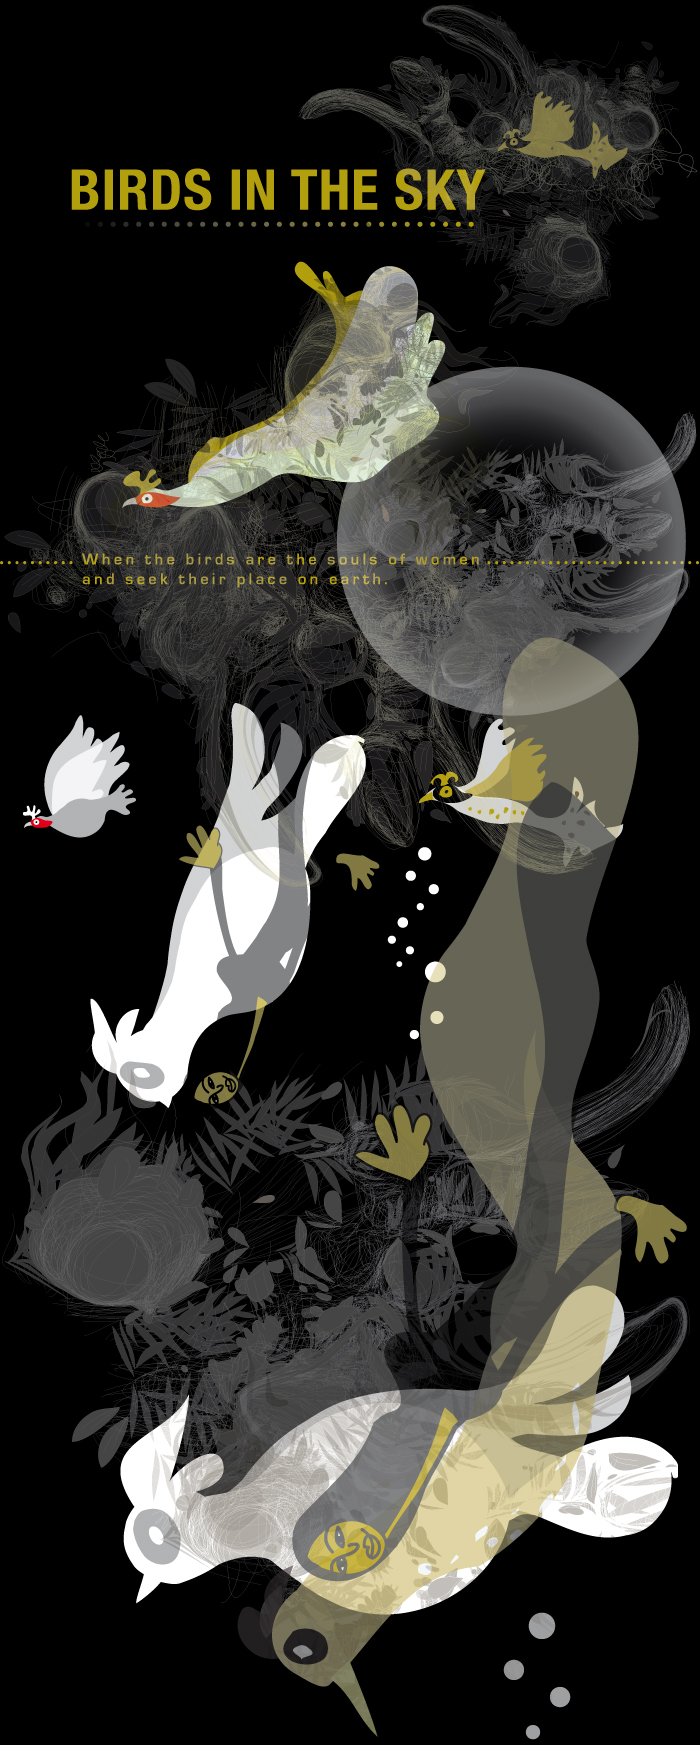 BIrds in the sky, illustrated by Montse Noguera